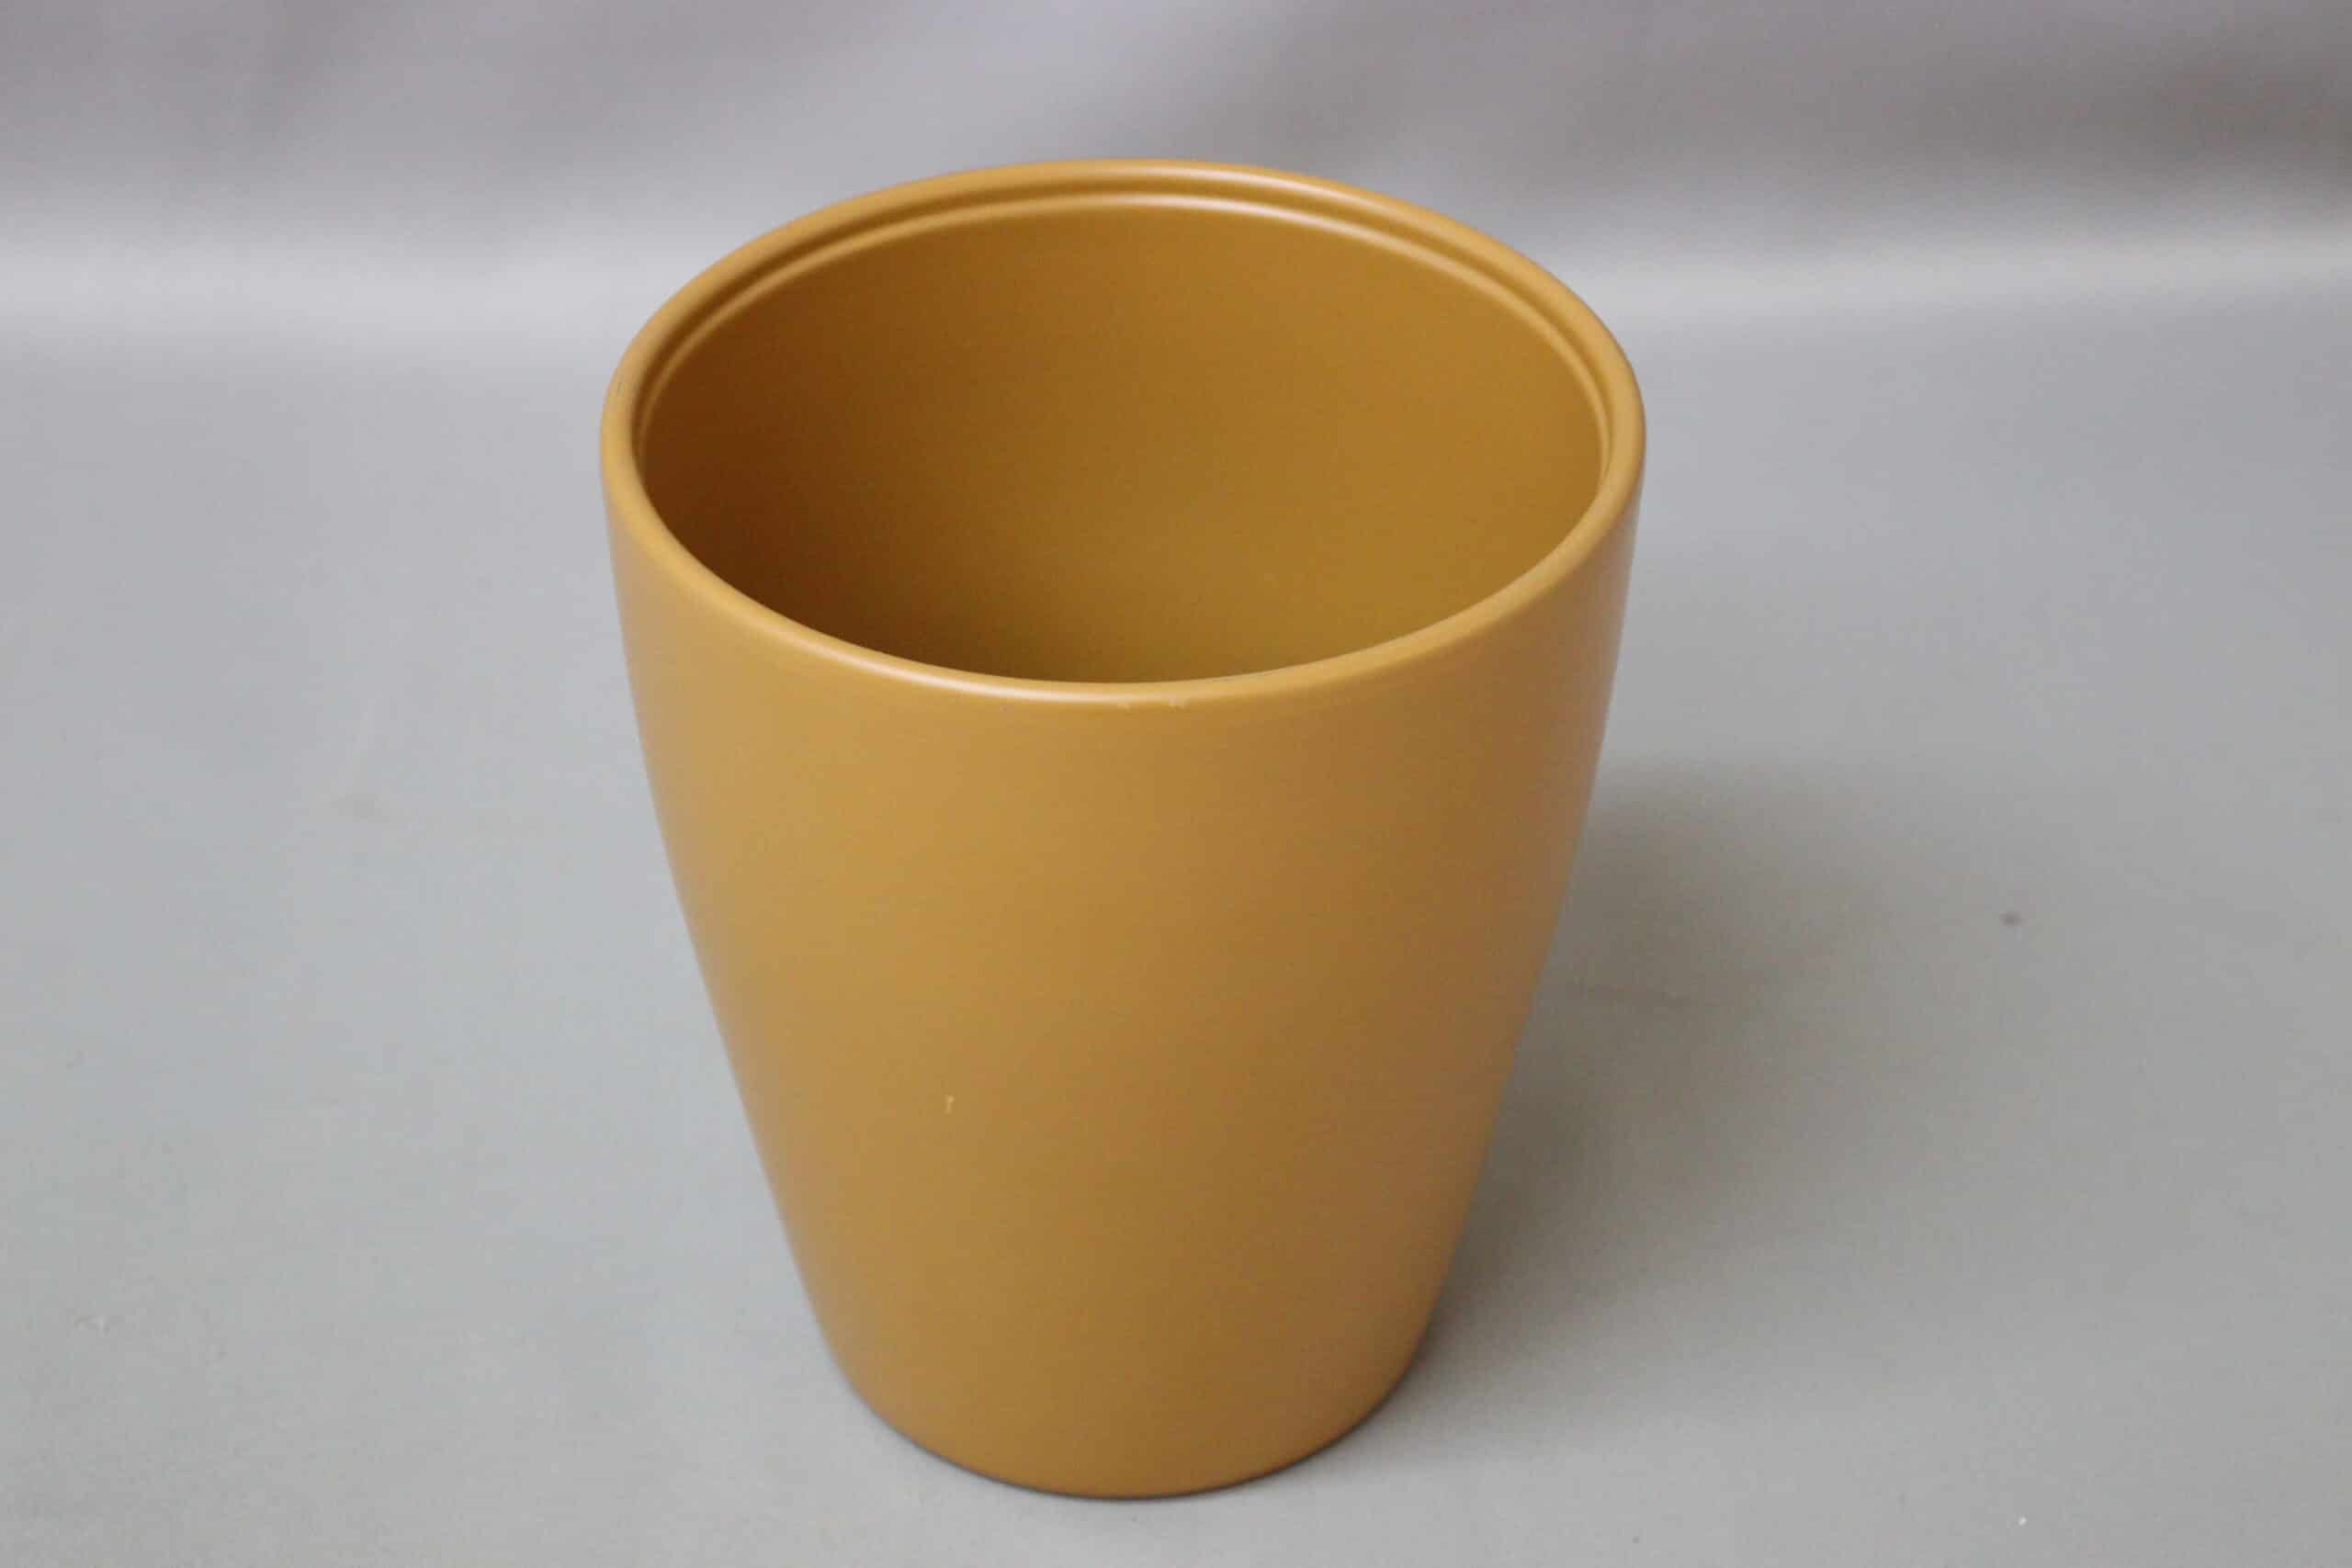 Smooth caramel-coloured pot cover for potted plants.